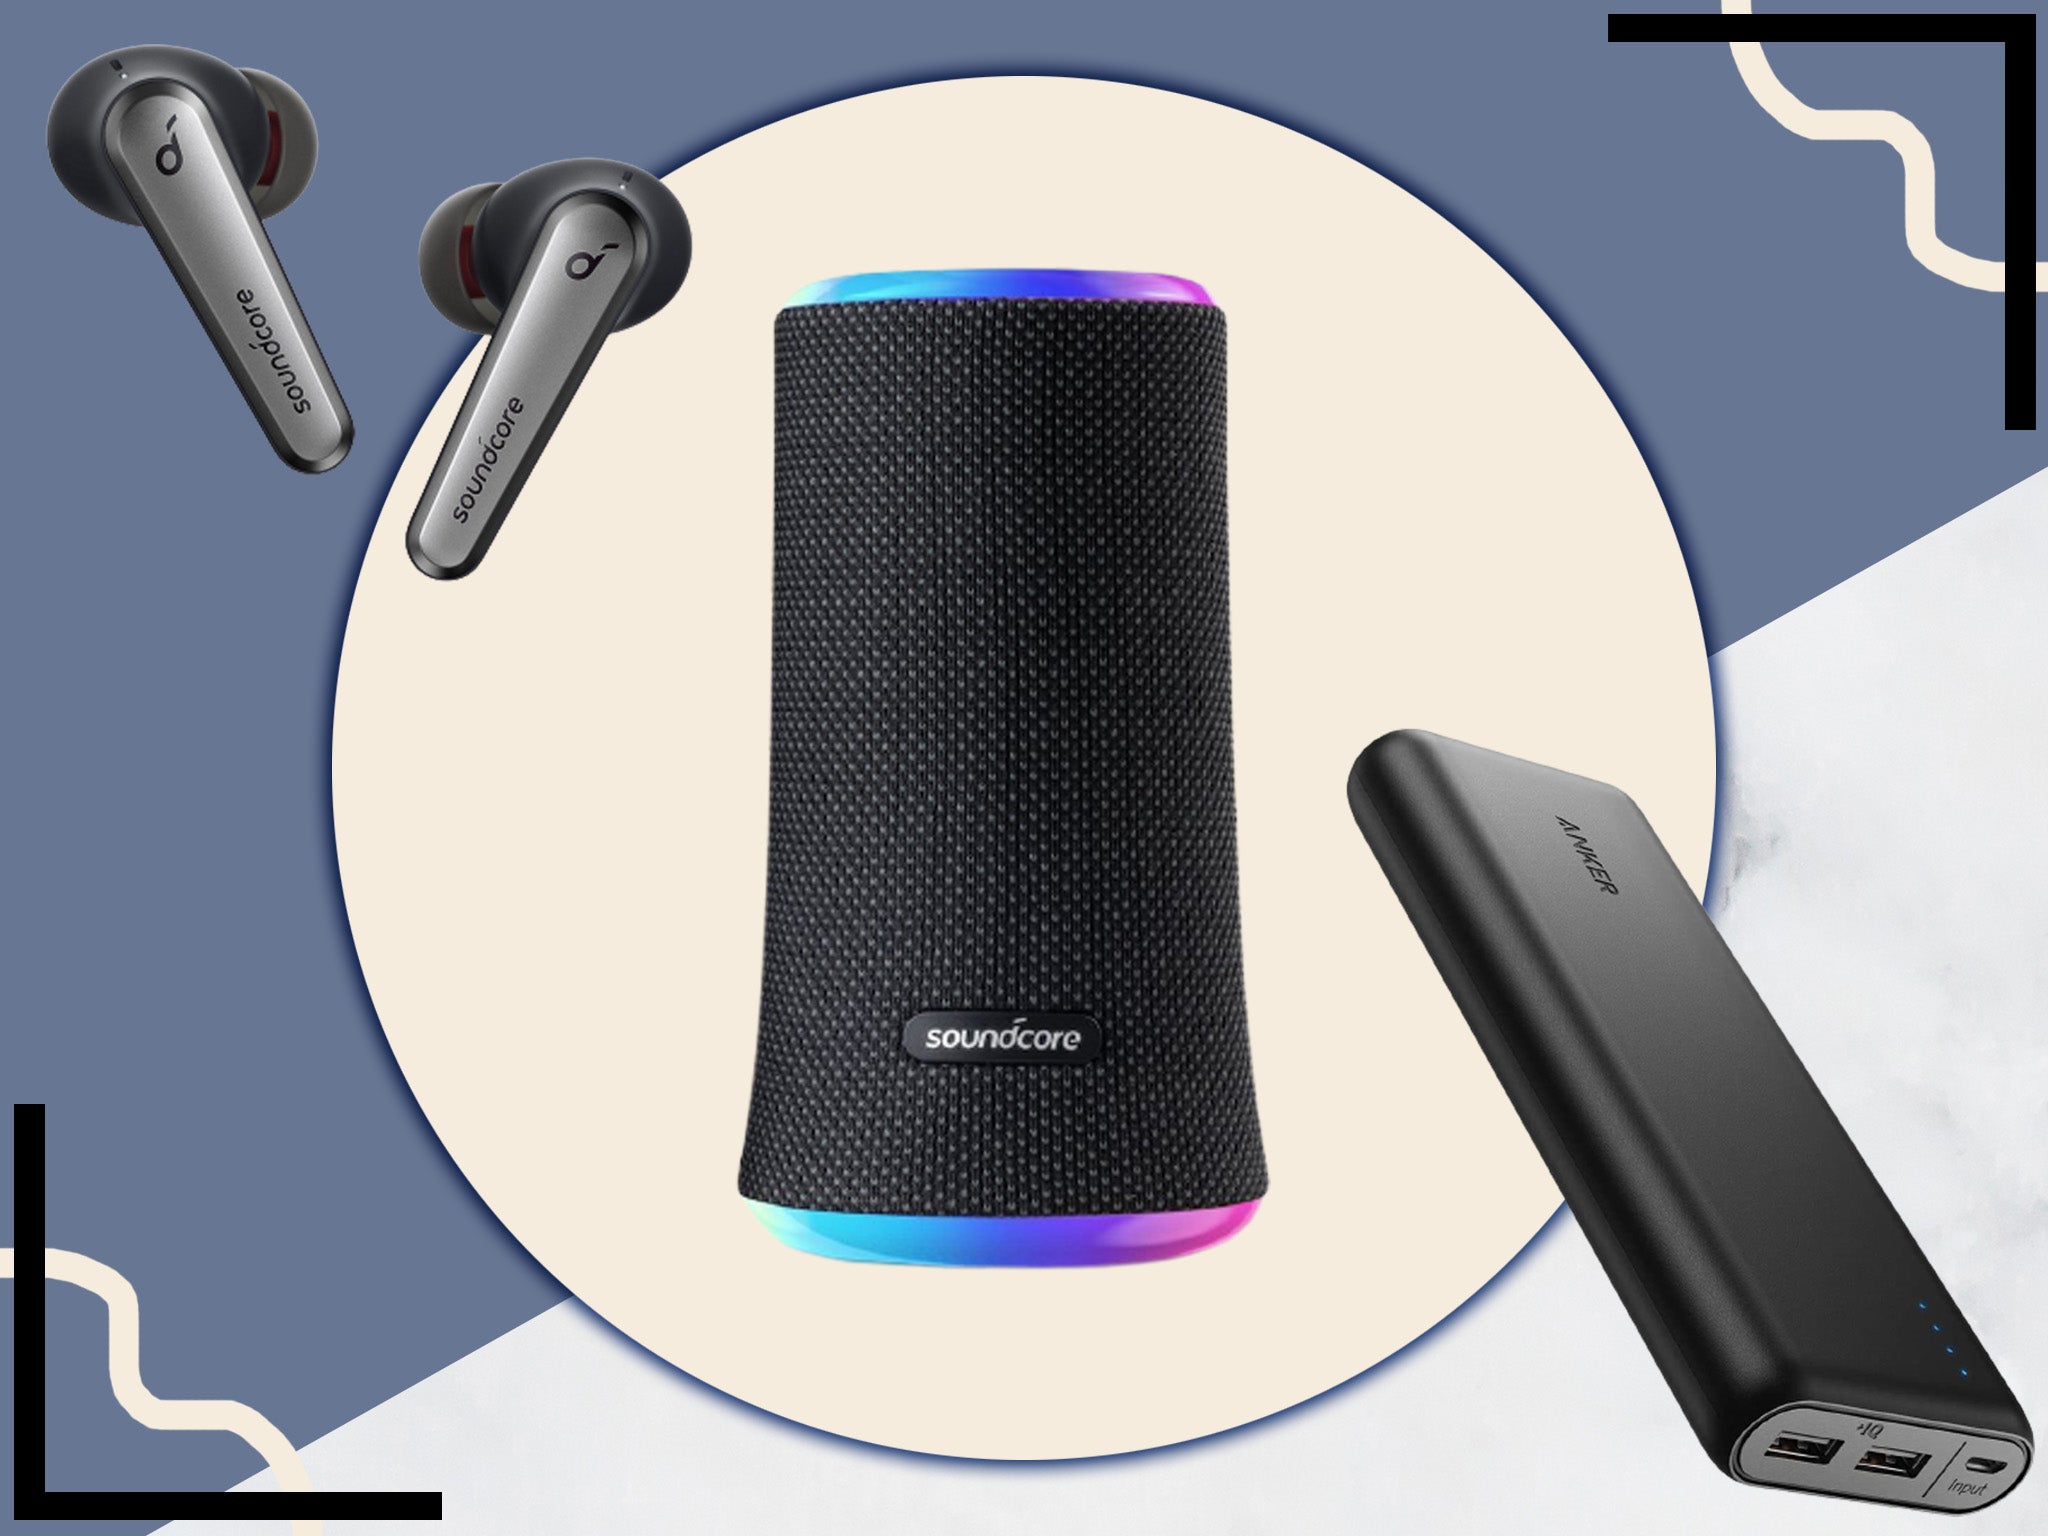 Anker buying guide: Soundcore speakers, power banks and more | The